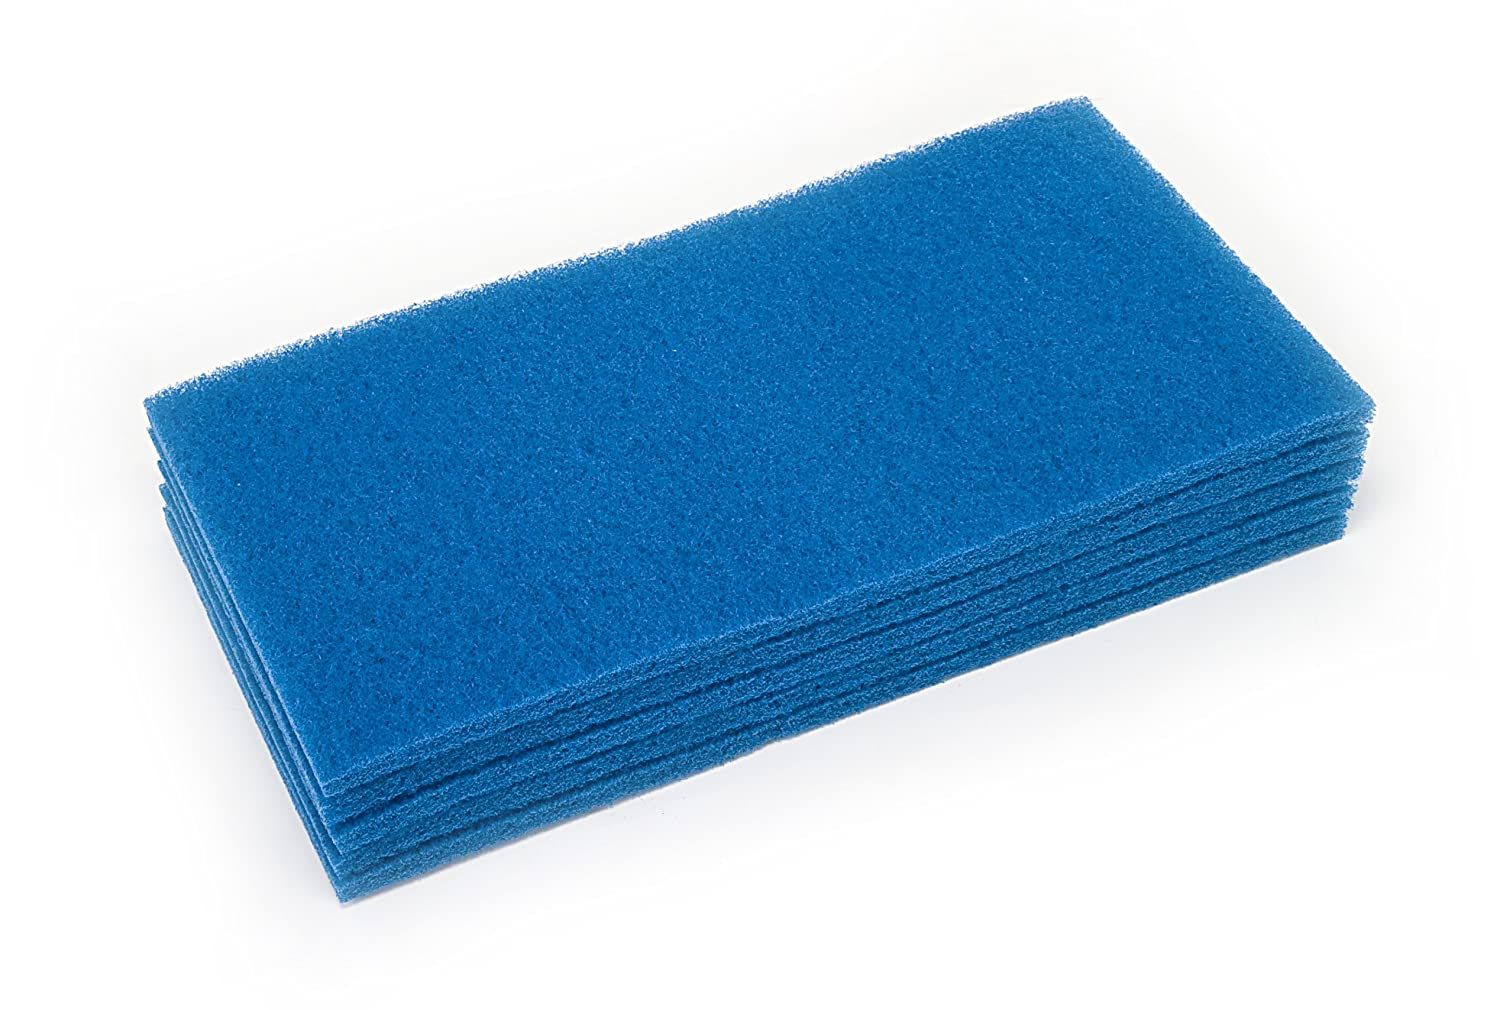 Clarke 997006 Commercial 14 Inch X 28 Inch Blue Pad, Case of 5